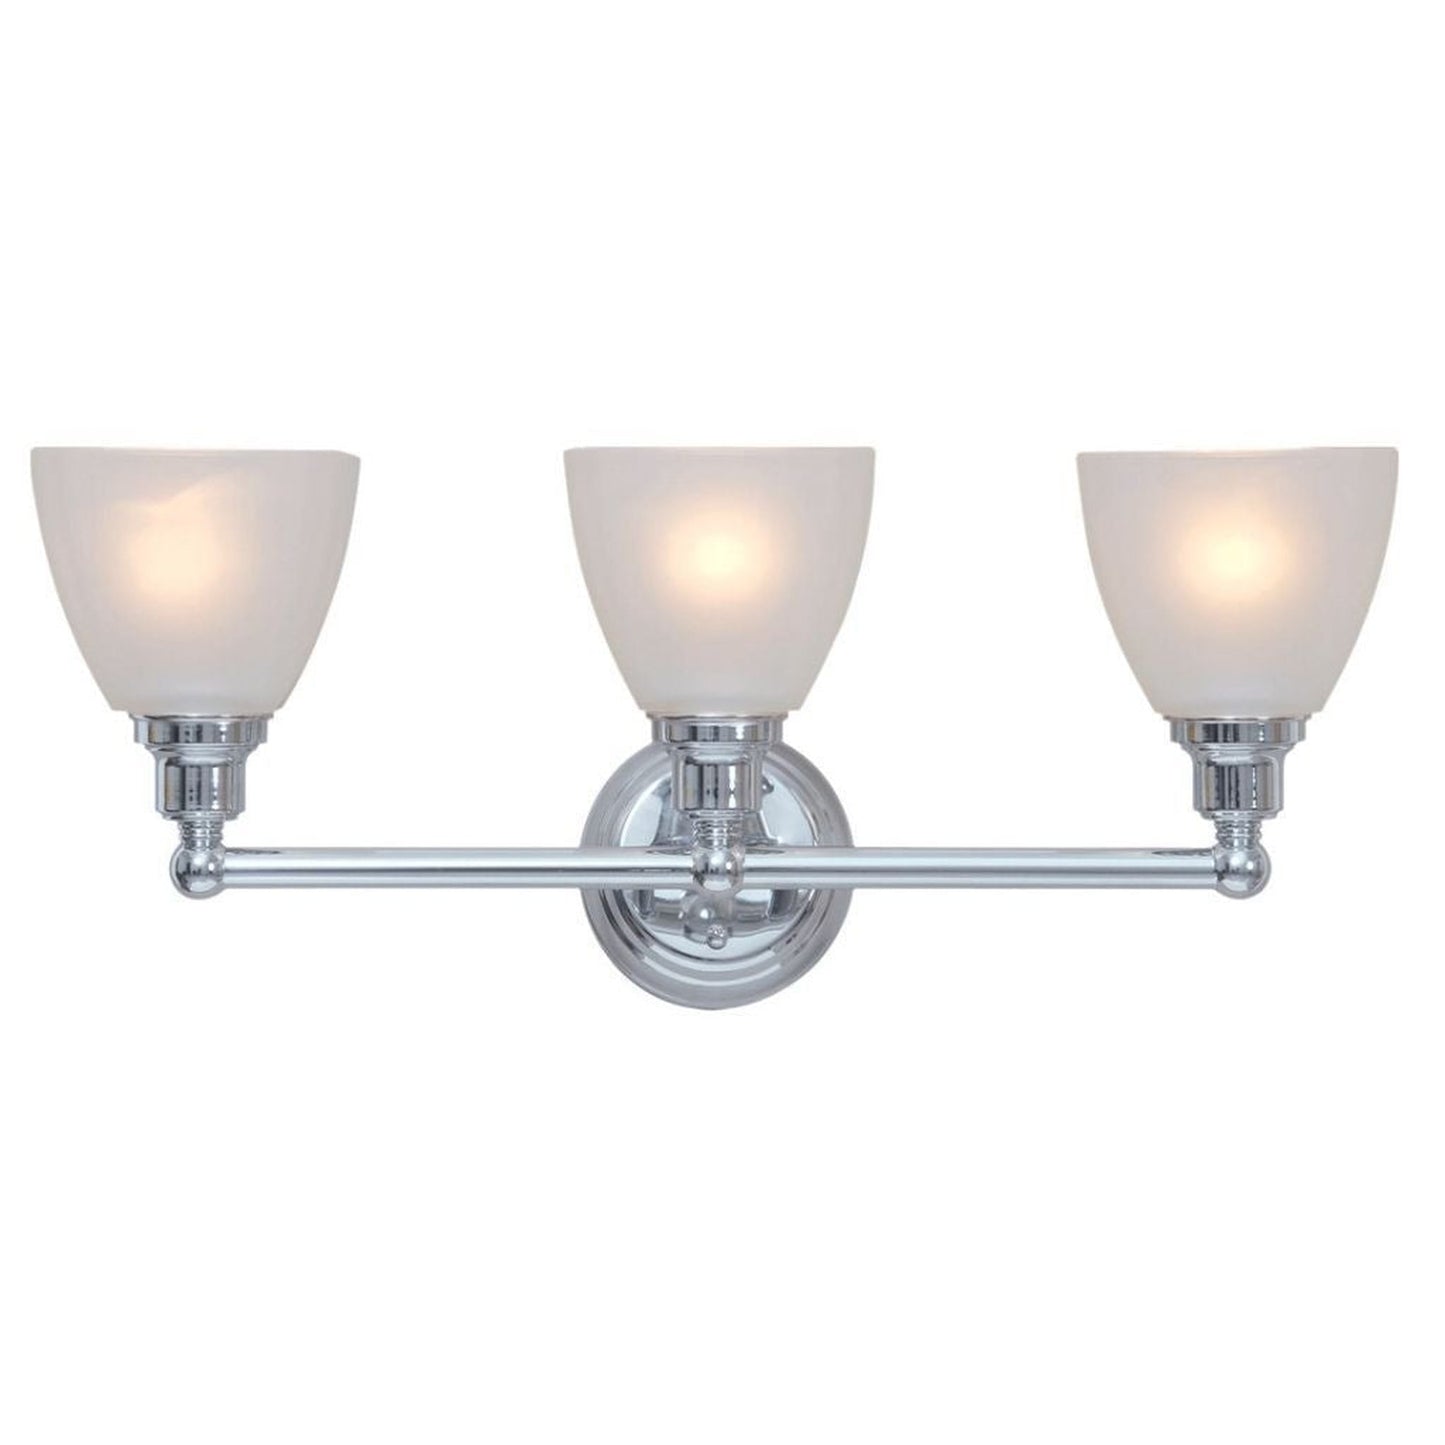 Craftmade Bradley 24" 3-Light Chrome Vanity Light With White Frosted Glass Shades